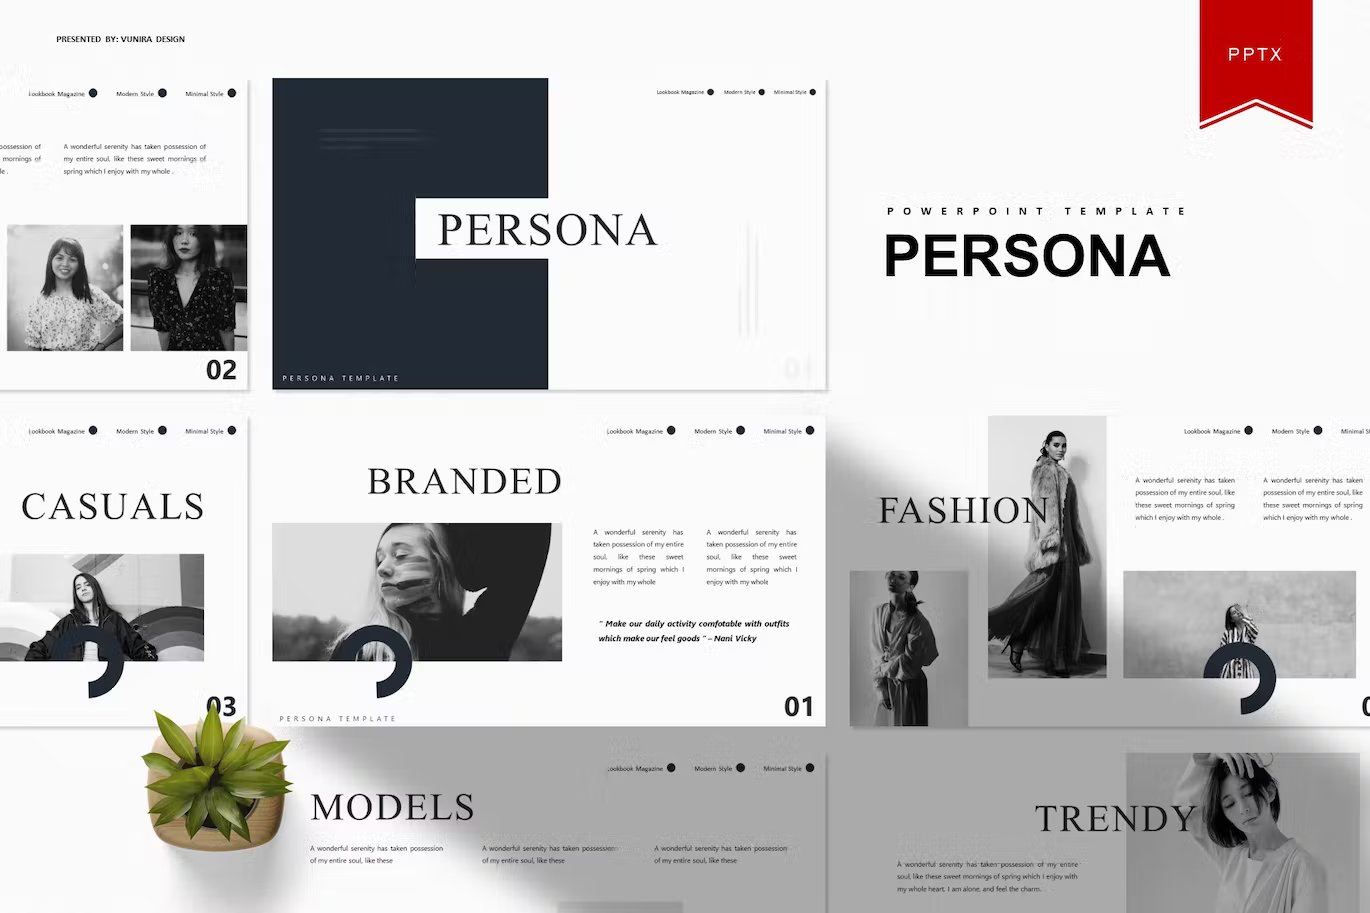 Personal data presentation template home page.